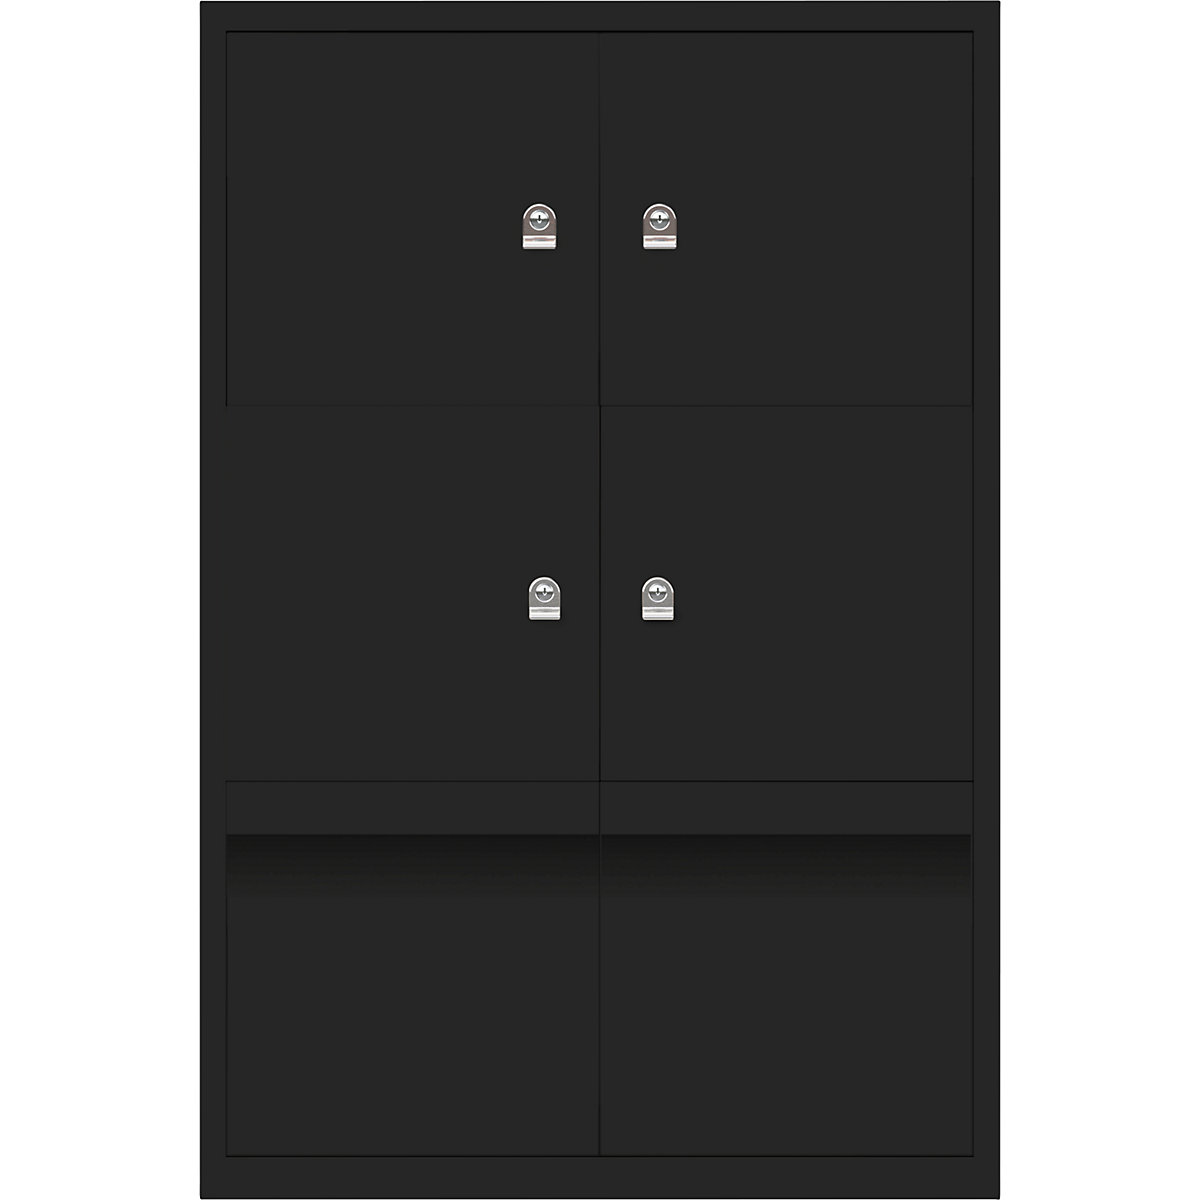 LateralFile™ lodge – BISLEY, with 4 lockable compartments and 2 drawers, height 375 mm each, black-8